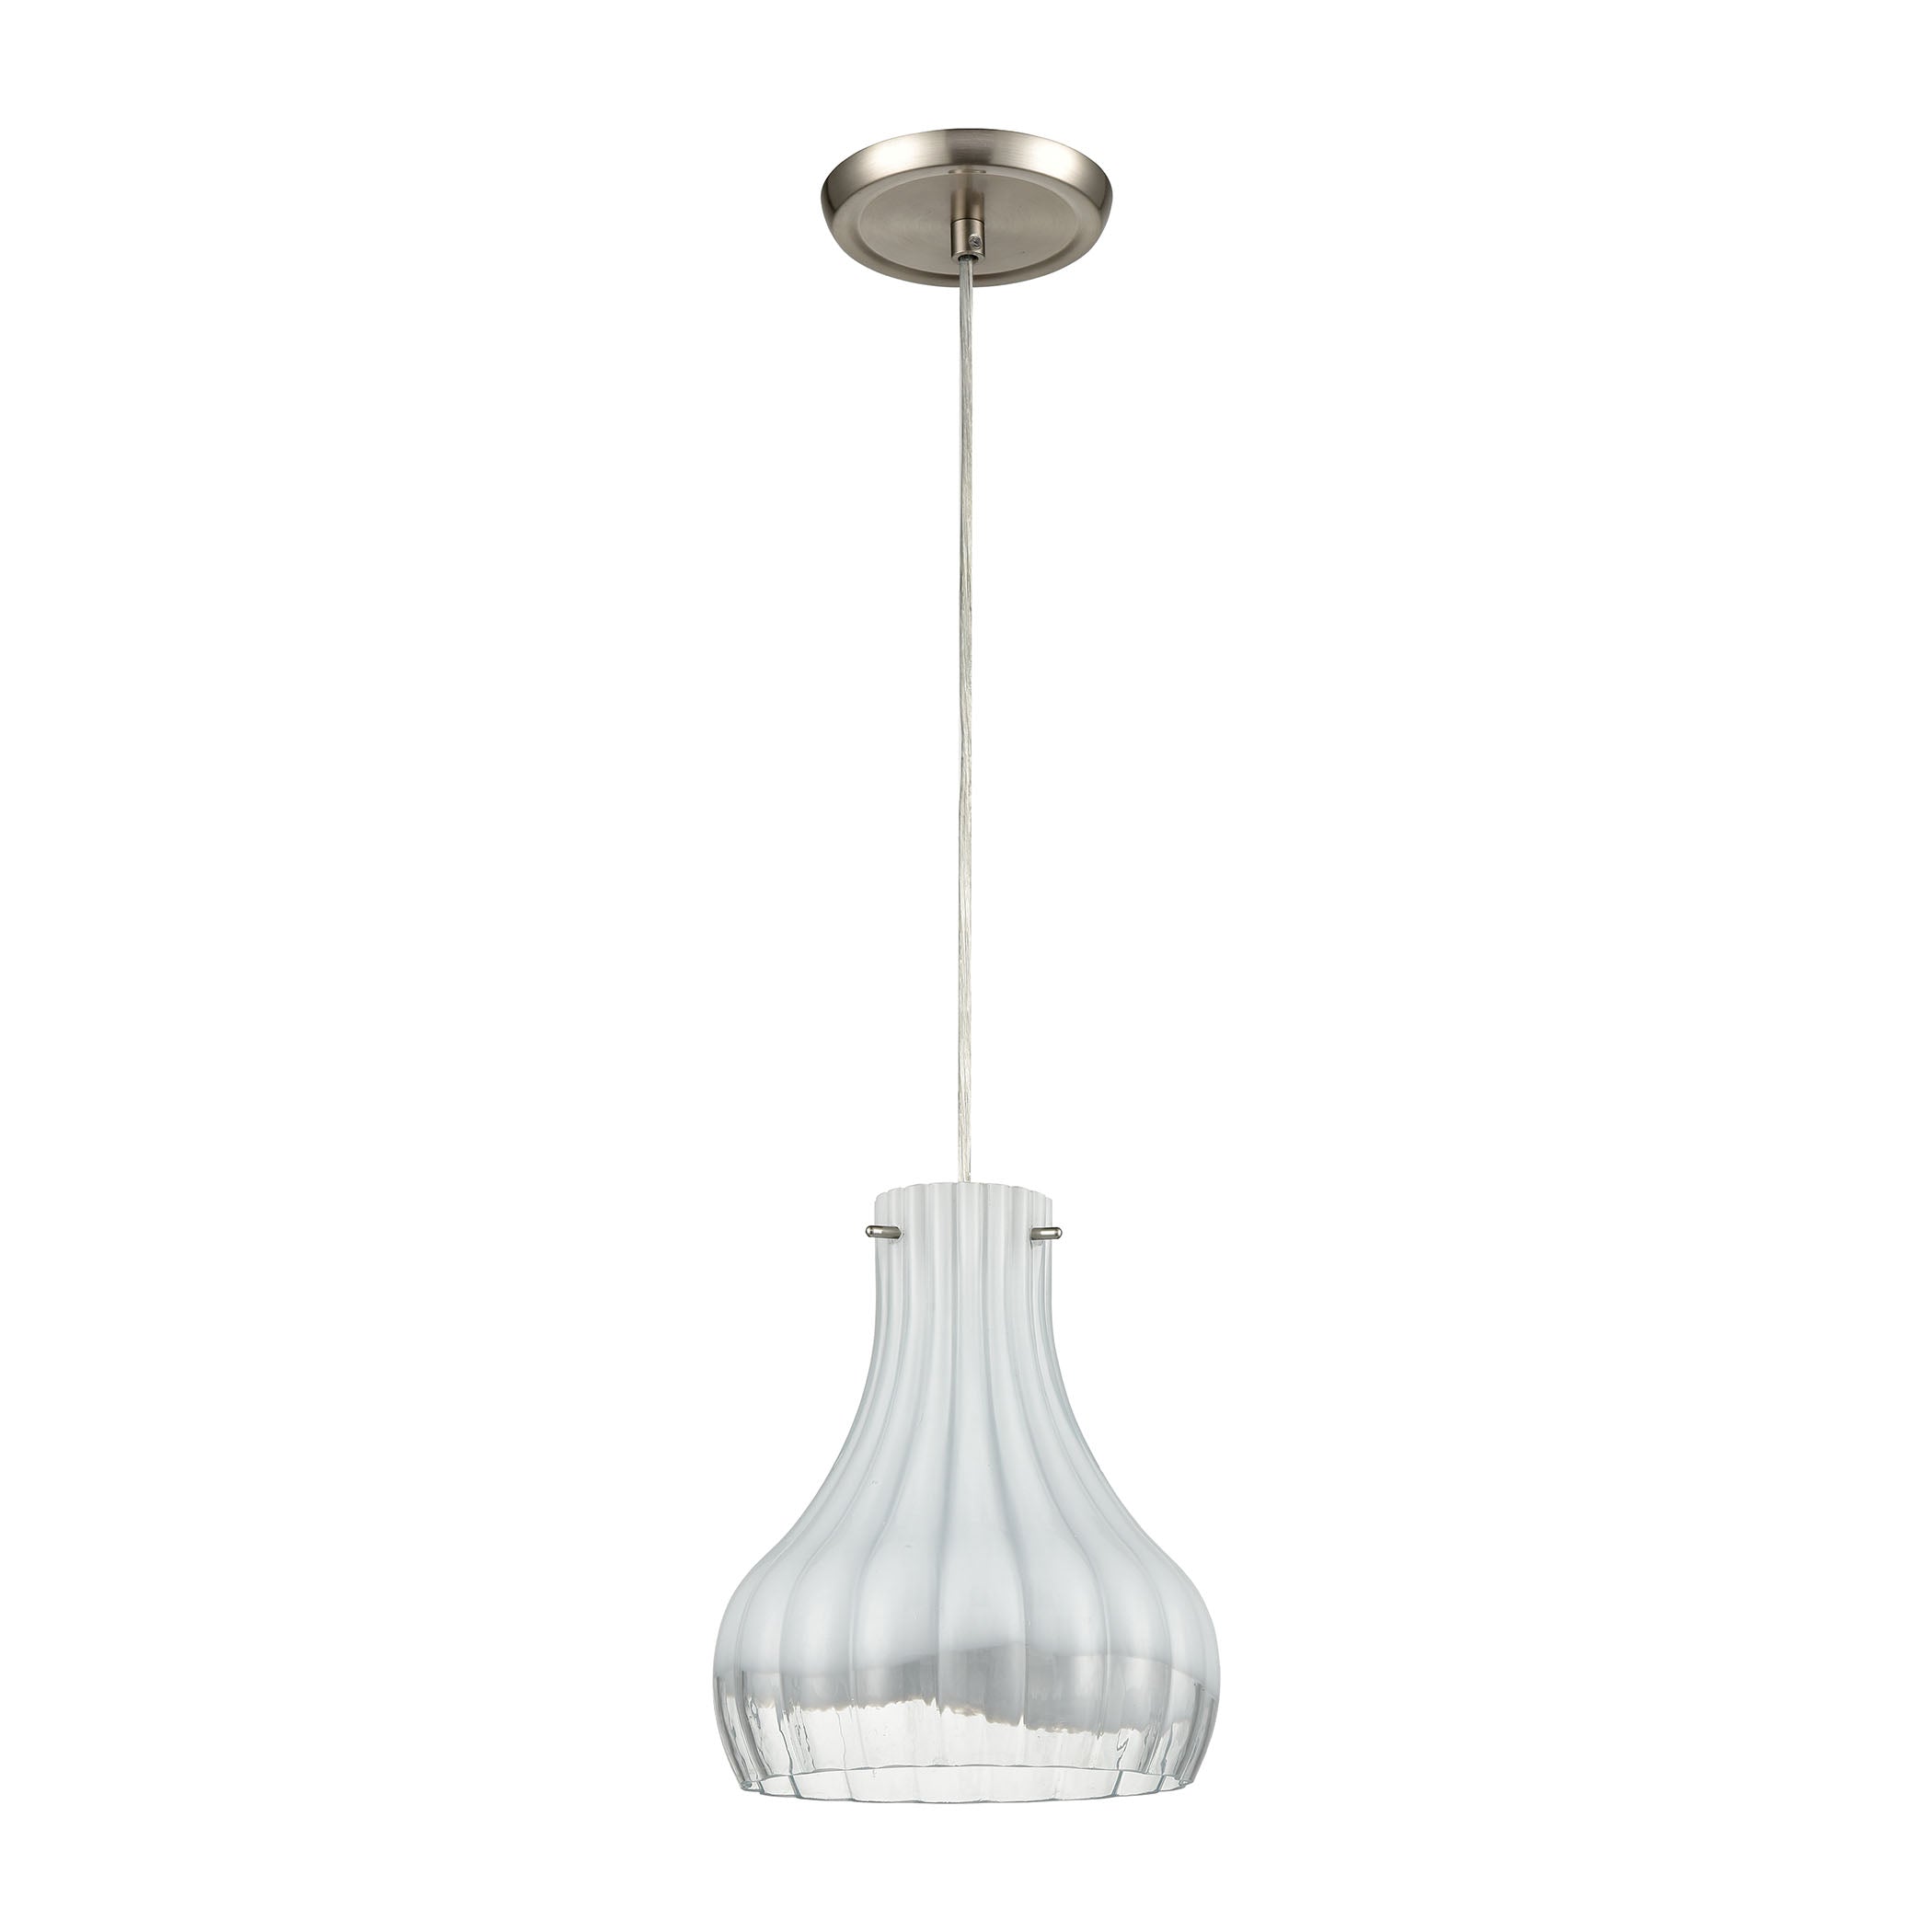 ELK Lighting 30150/1 Coastal Scallop 1-Light Mini Pendant in Satin Nickel with Opal White and Clear Glass